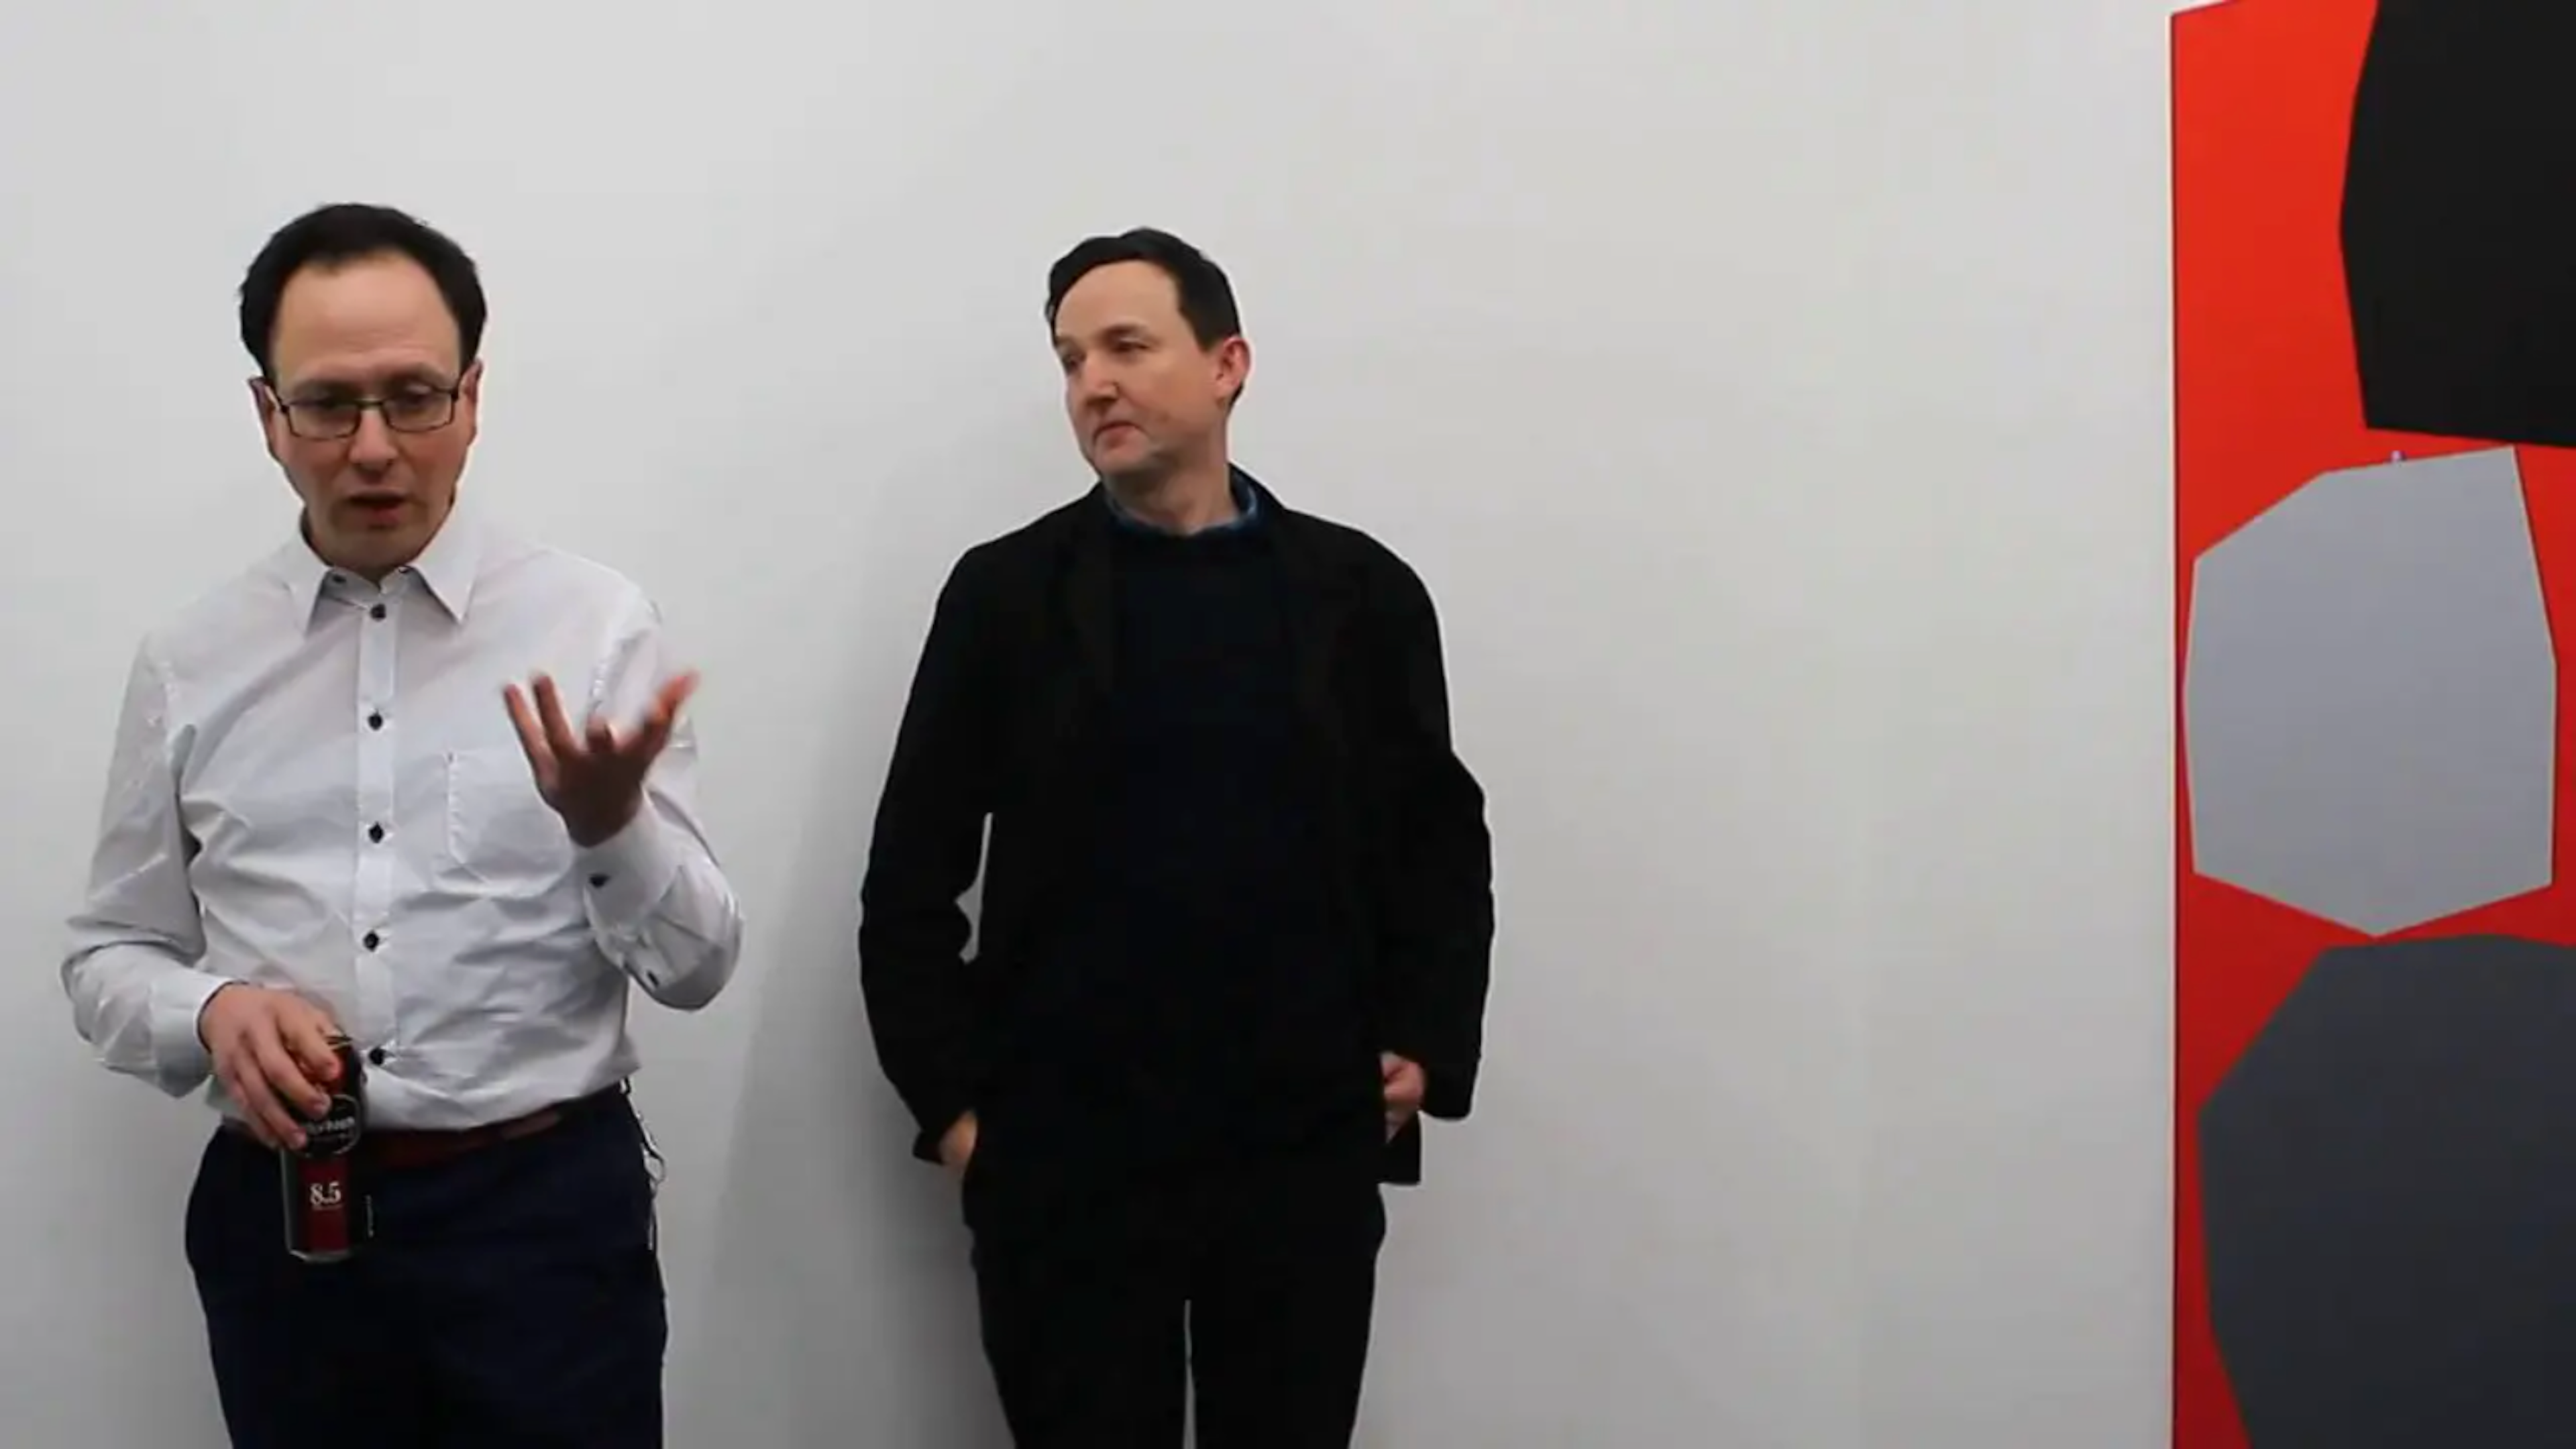 Daniel Sturgis in conversation with John Chilver, 2014, No Show Space